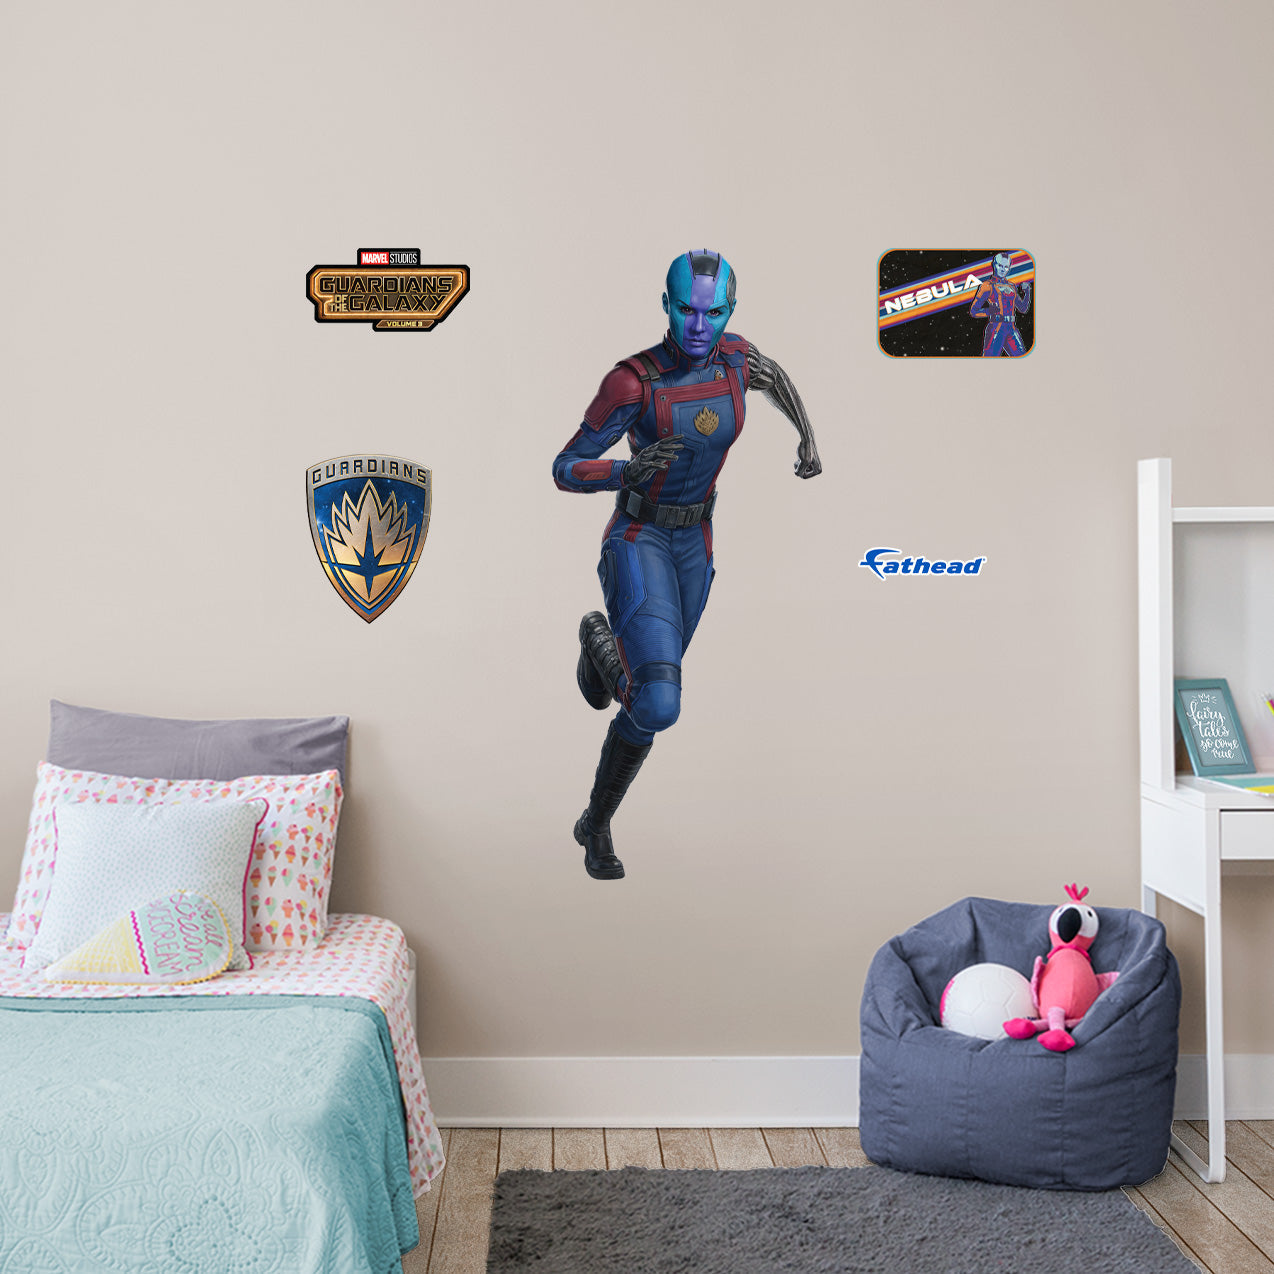 Guardians of the Galaxy vol.3: Nebula RealBig - Officially Licensed Marvel Removable Adhesive Decal